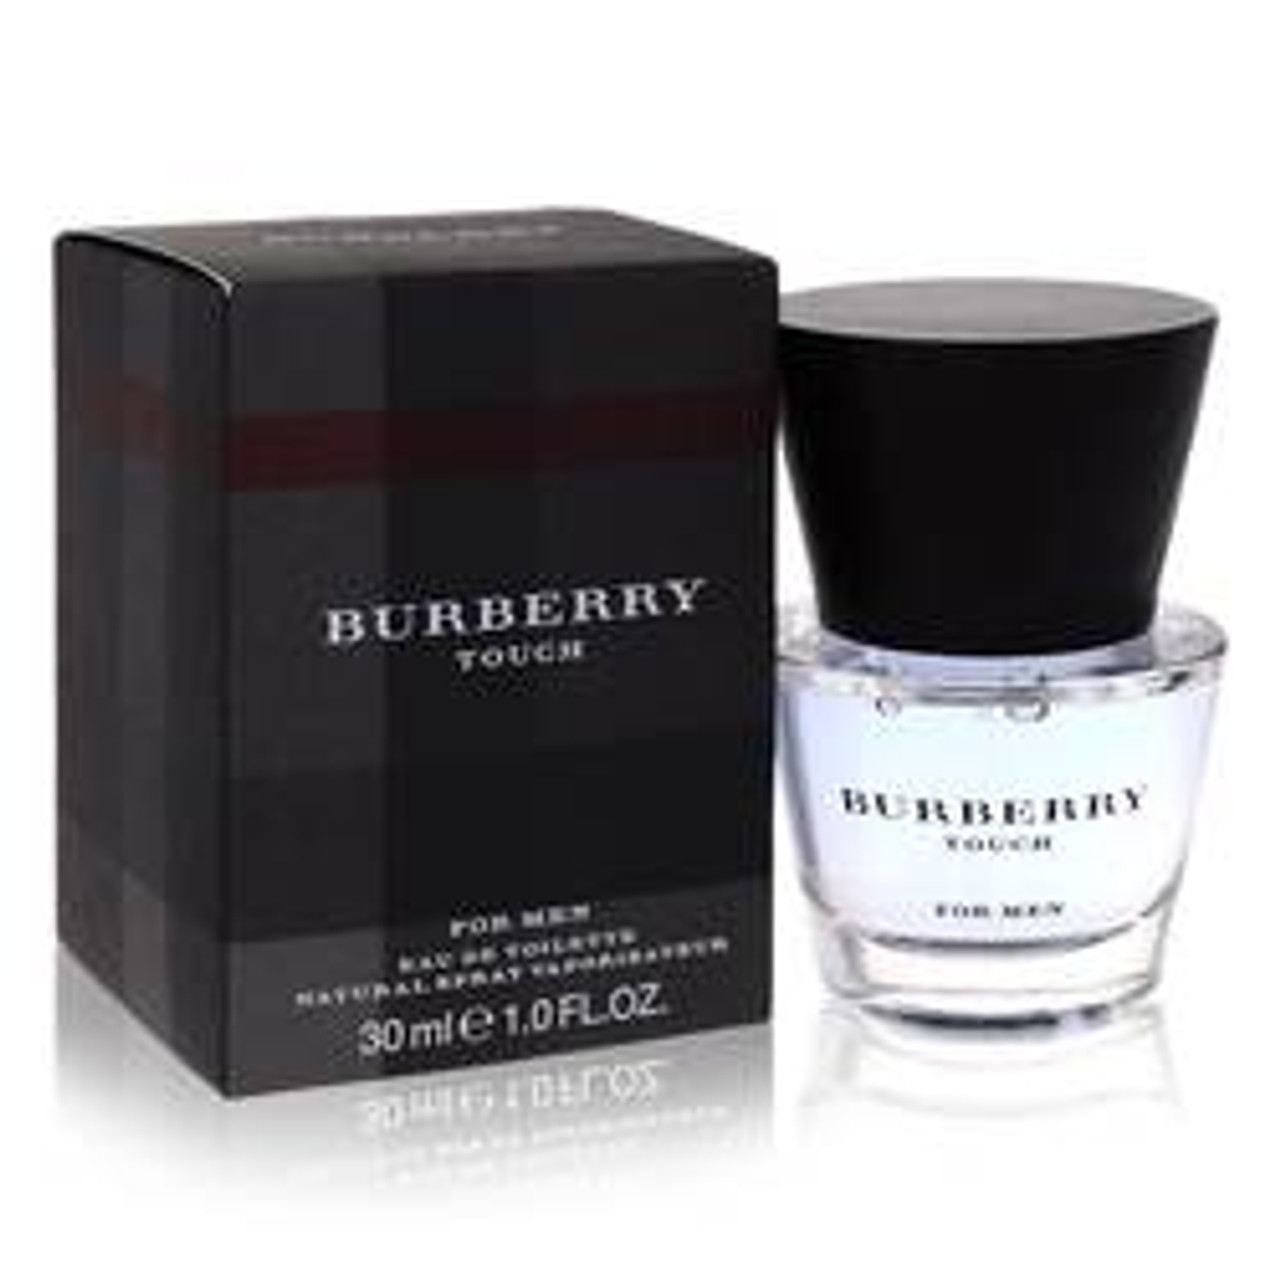 Burberry Touch Cologne By Burberry Eau De Toilette Spray 1 oz for Men - [From 79.50 - Choose pk Qty ] - *Ships from Miami